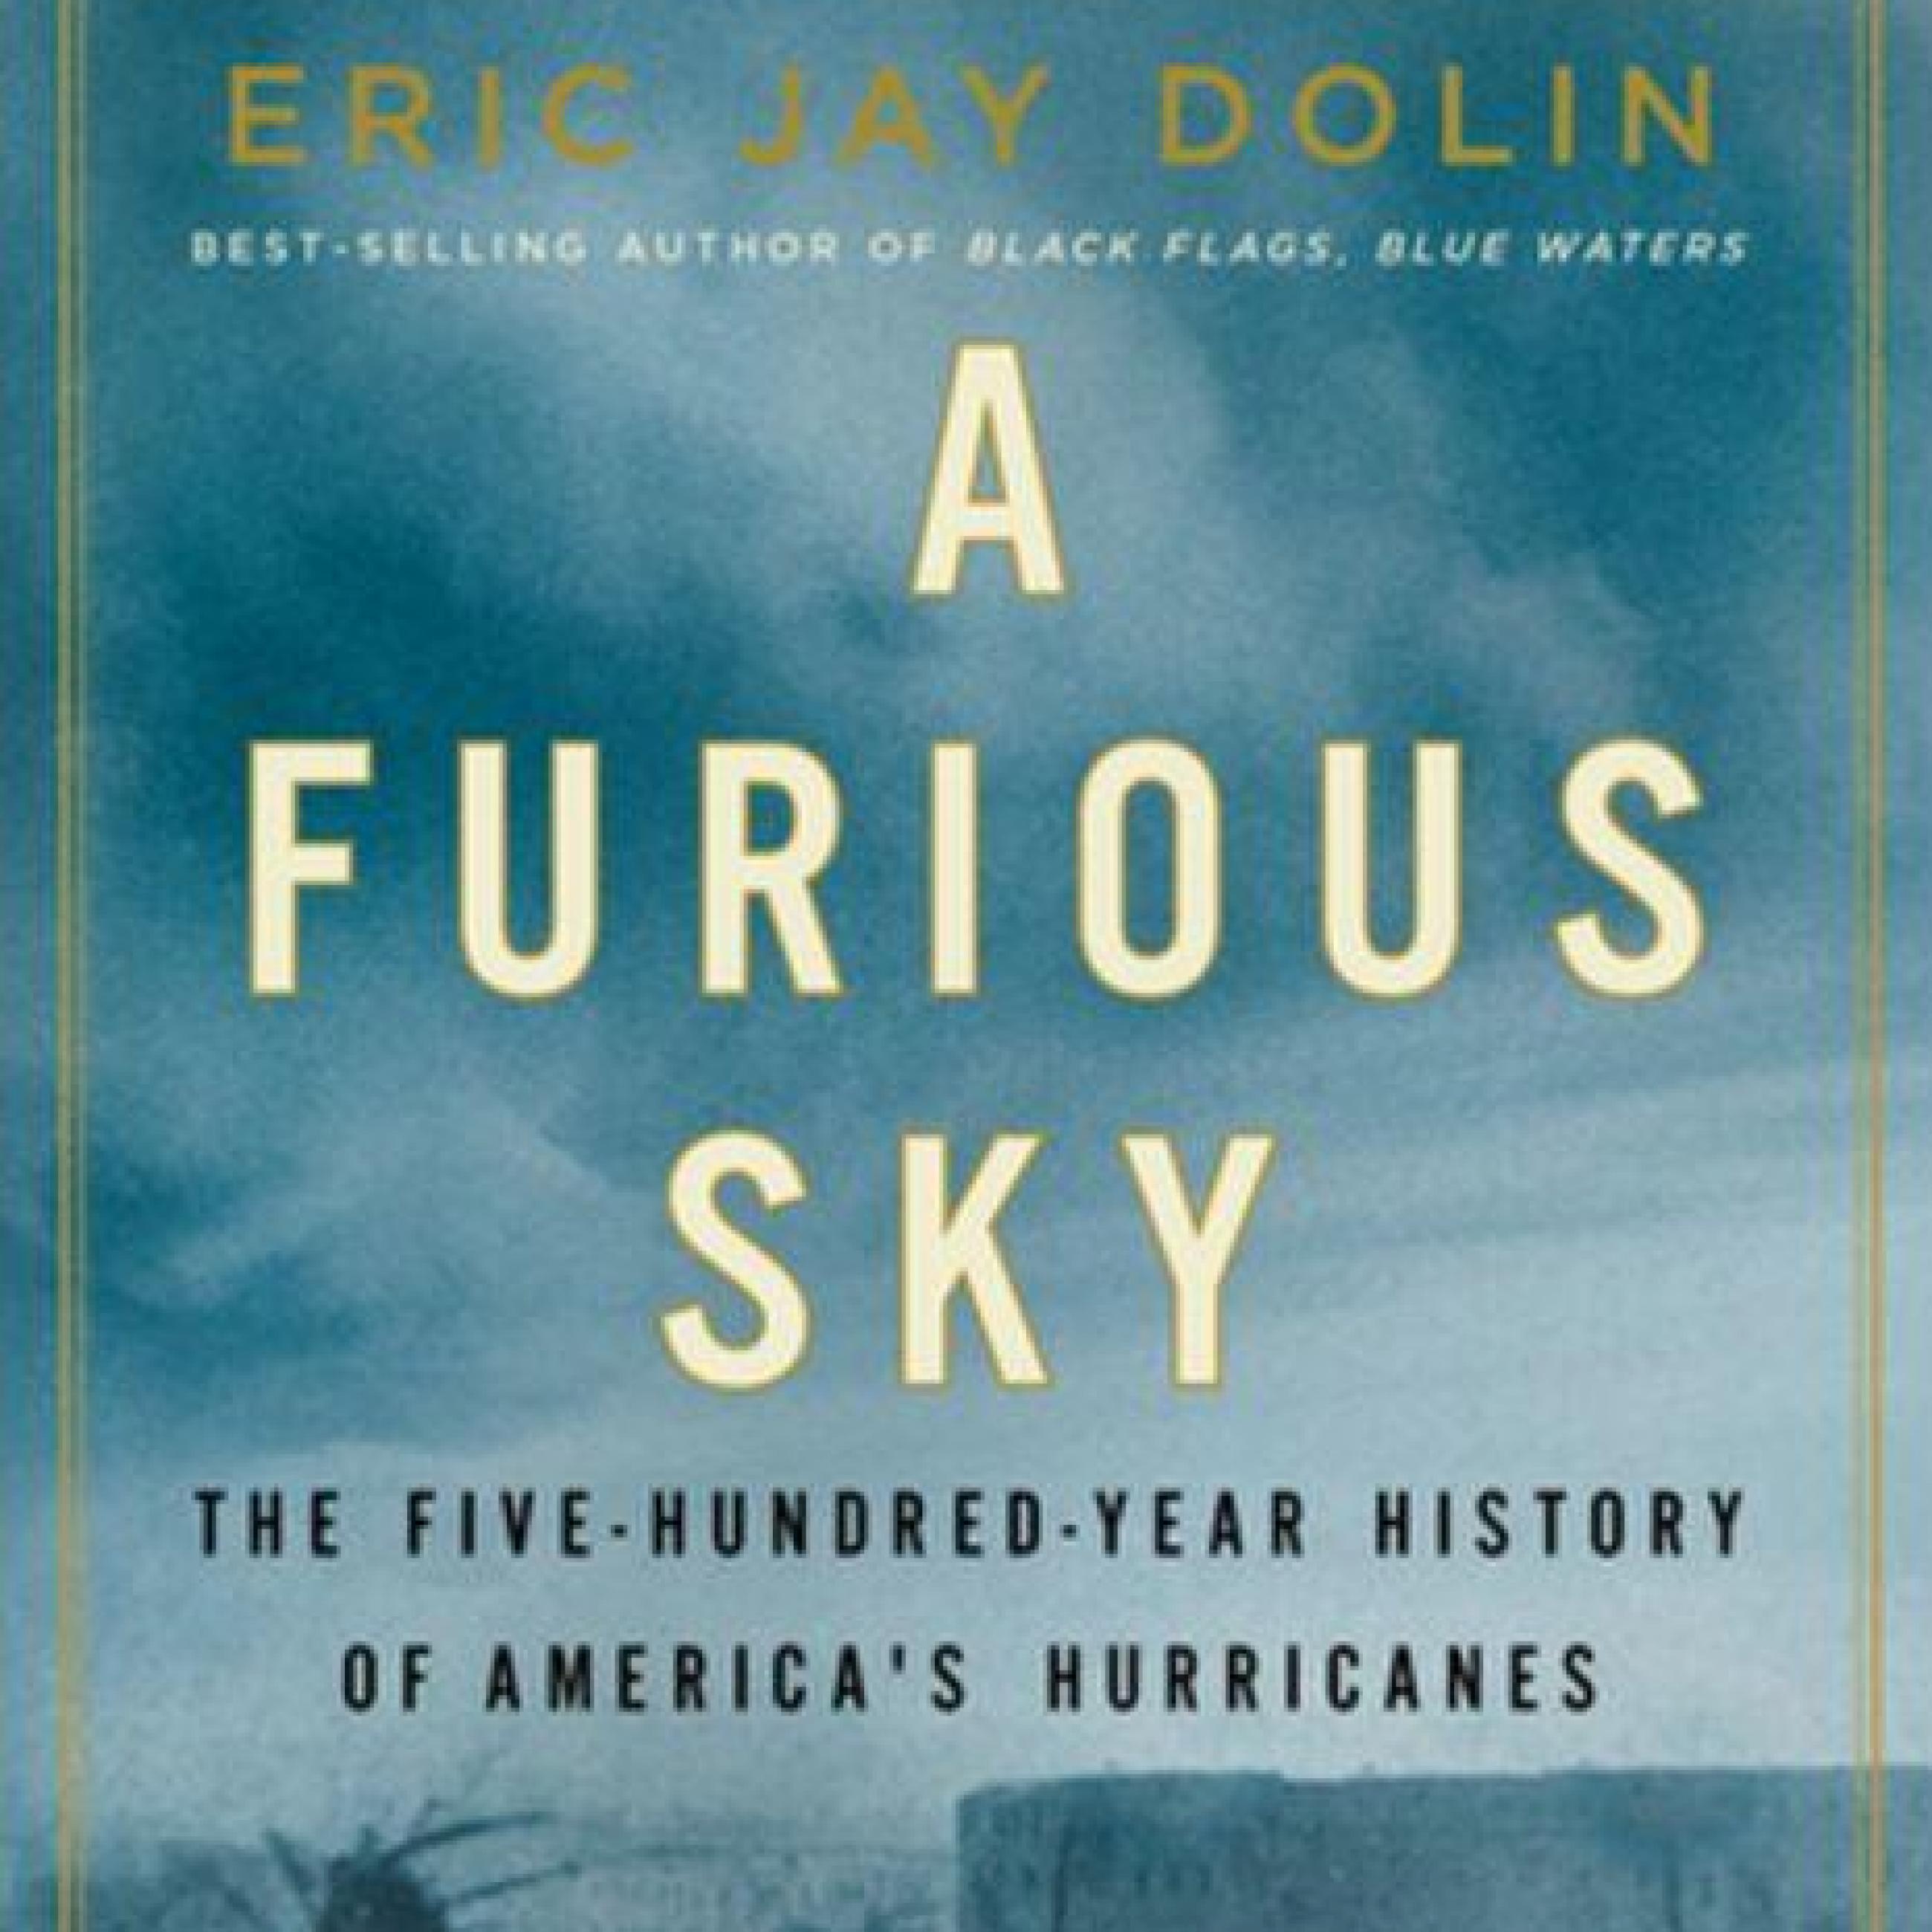 Furious Sky: The Five-Hundred-Year History of America's Hurricanes